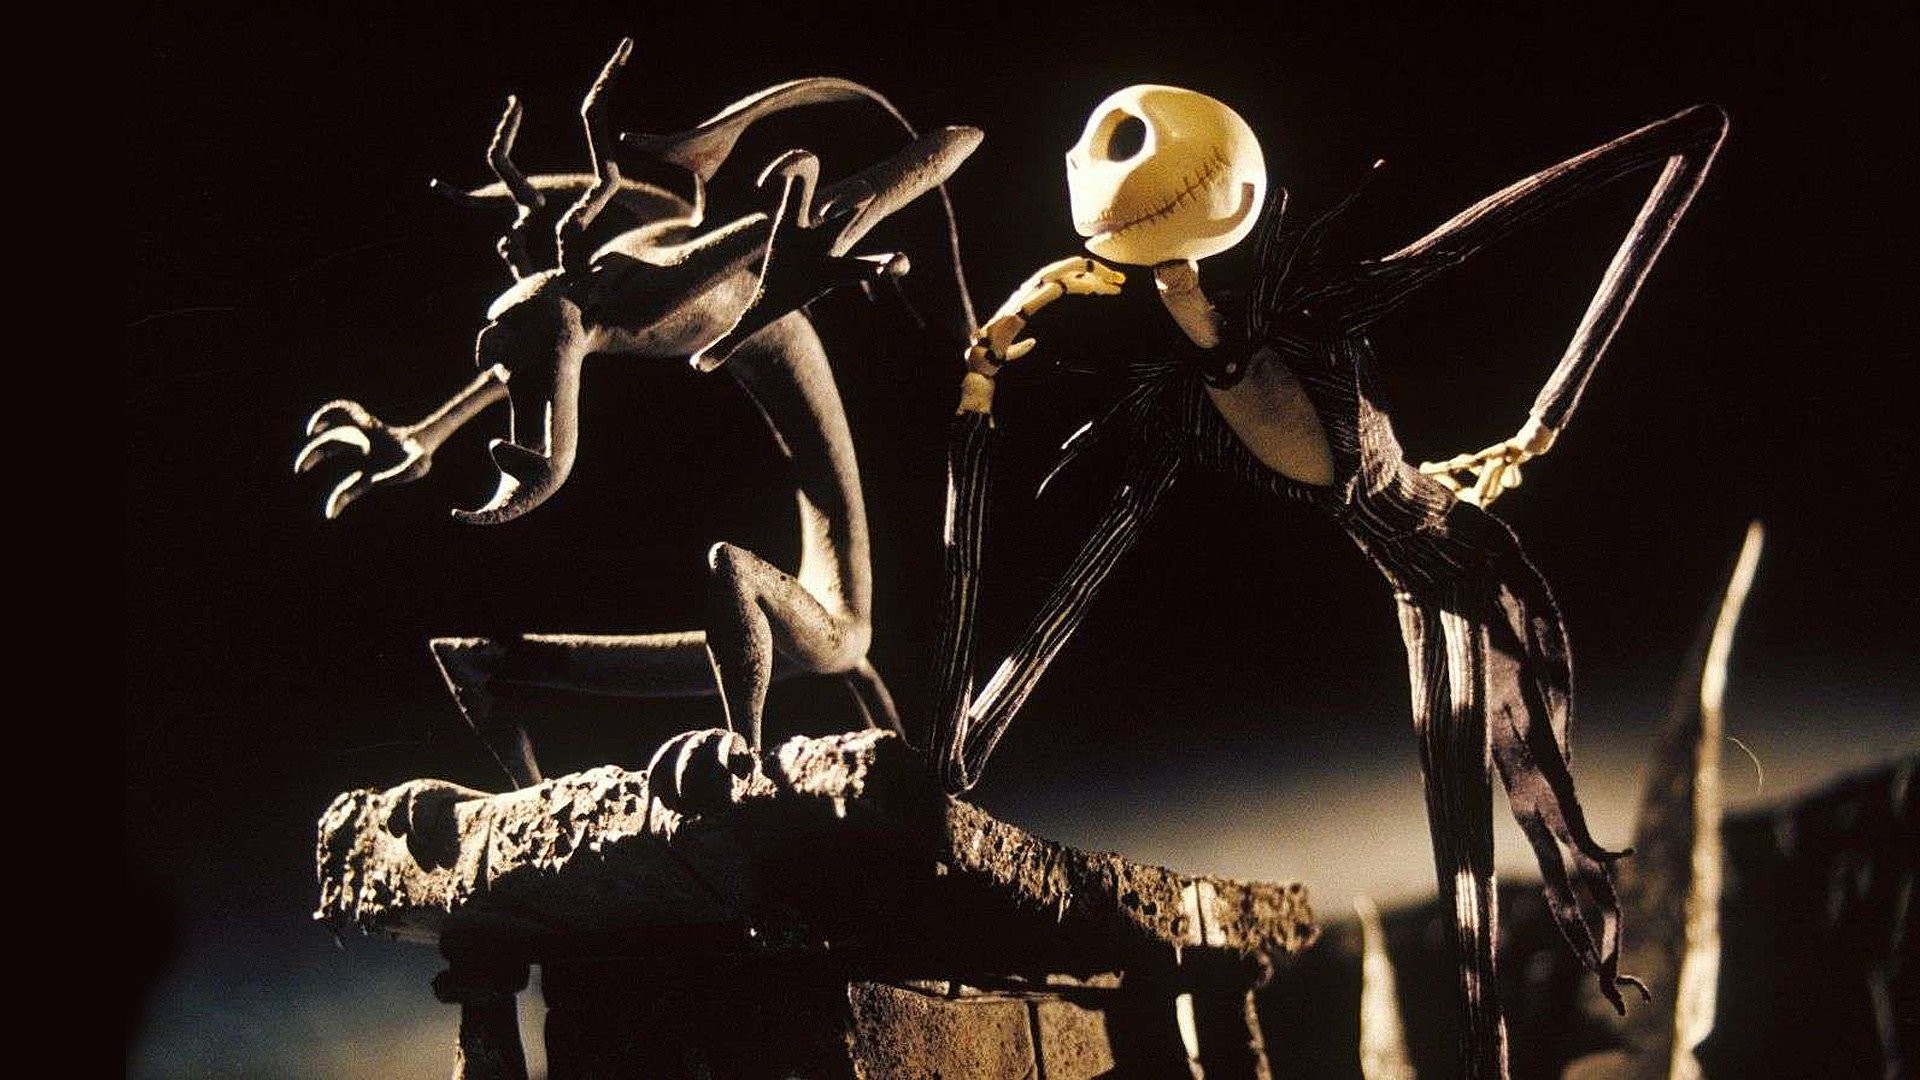 1920x1080 The Nightmare Before Christmas